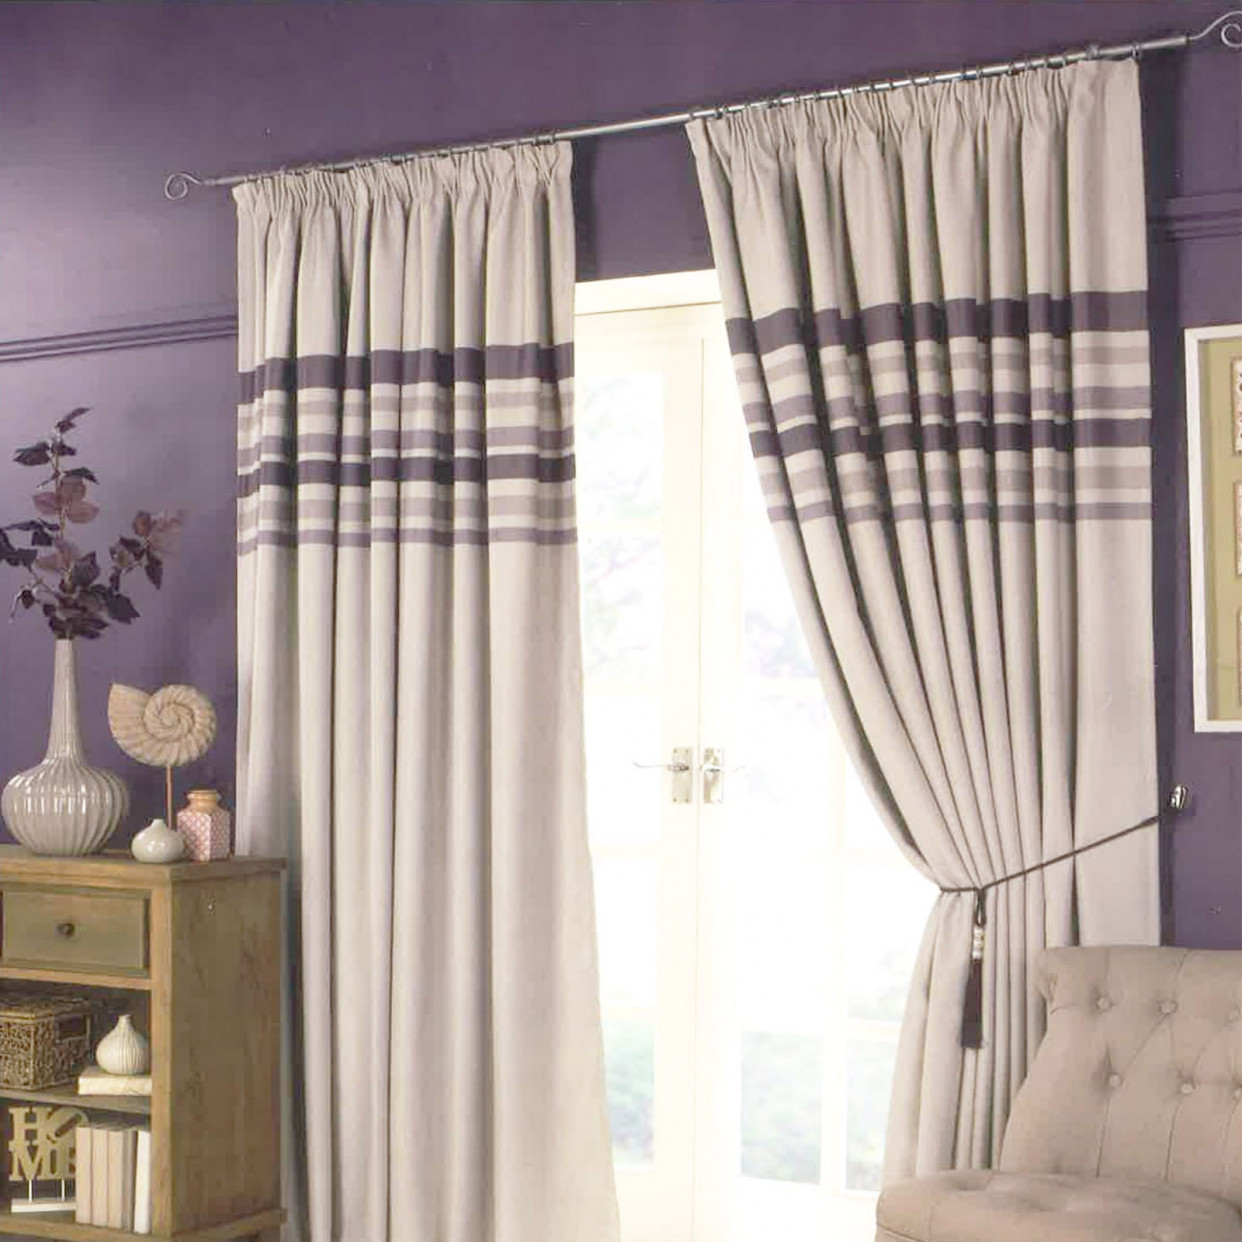 Pencil Pleat Striped Curtains - Natural>